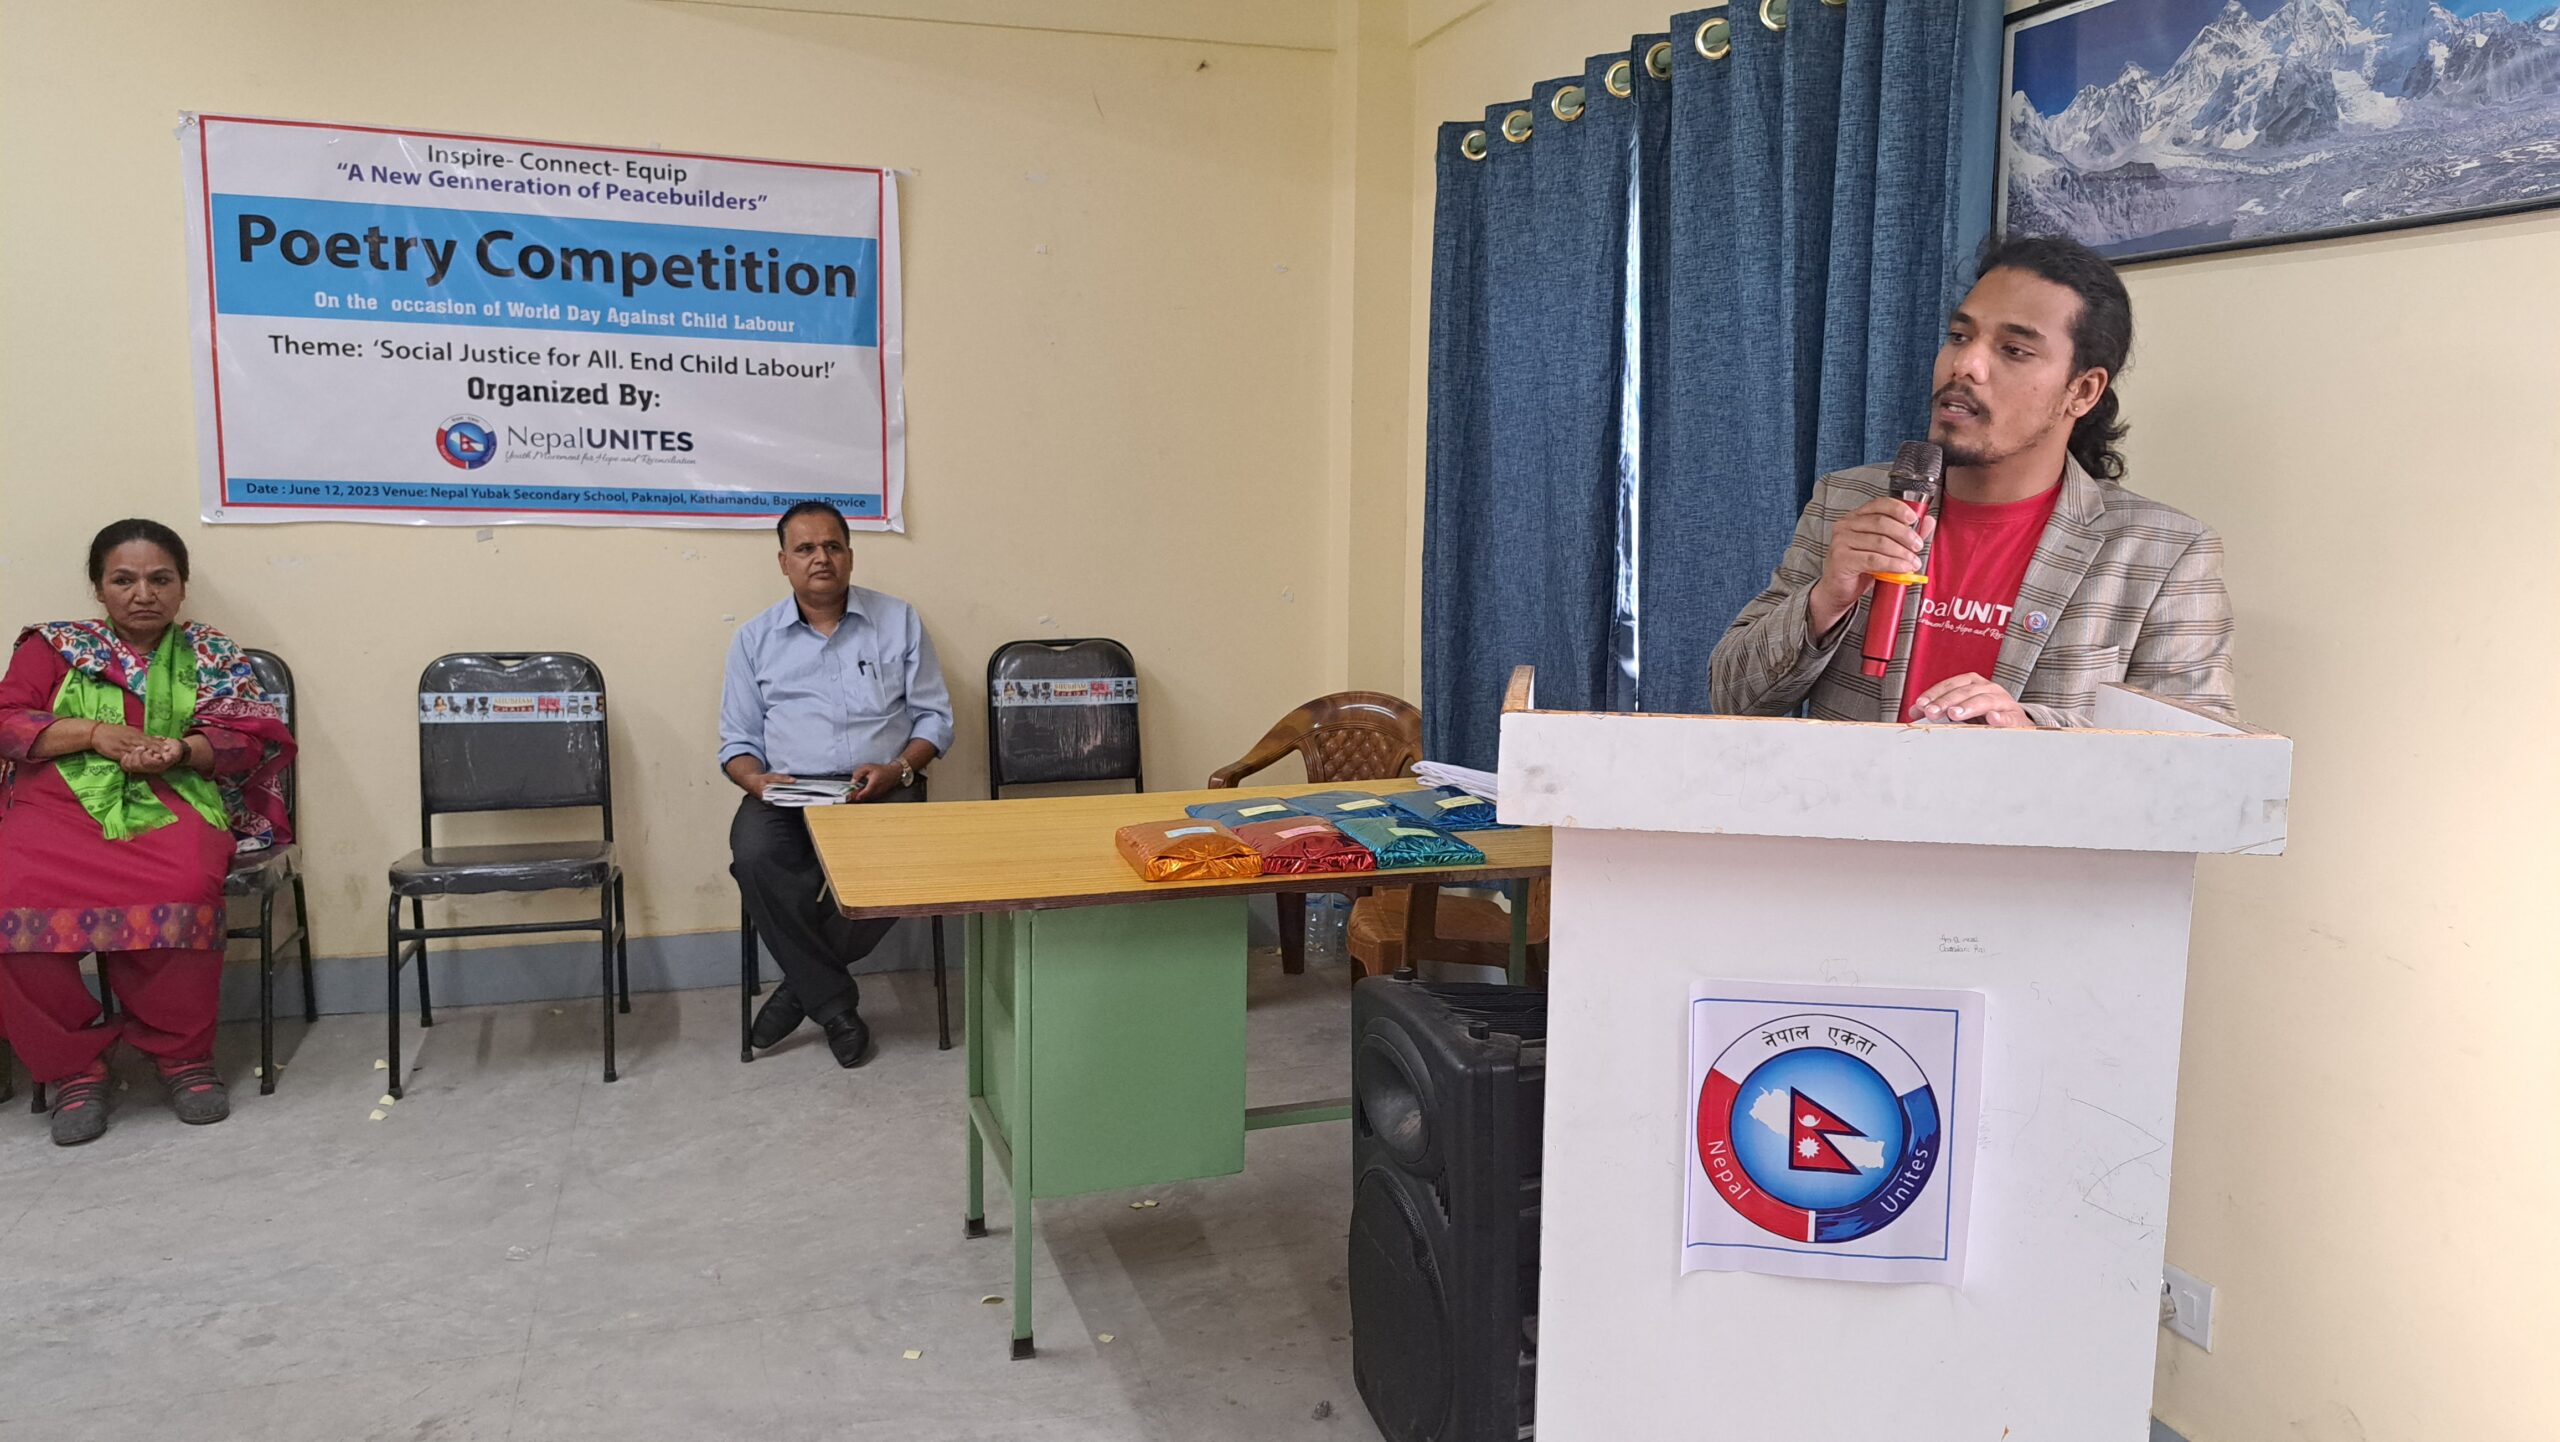 Poetry Competition Against Child Labour